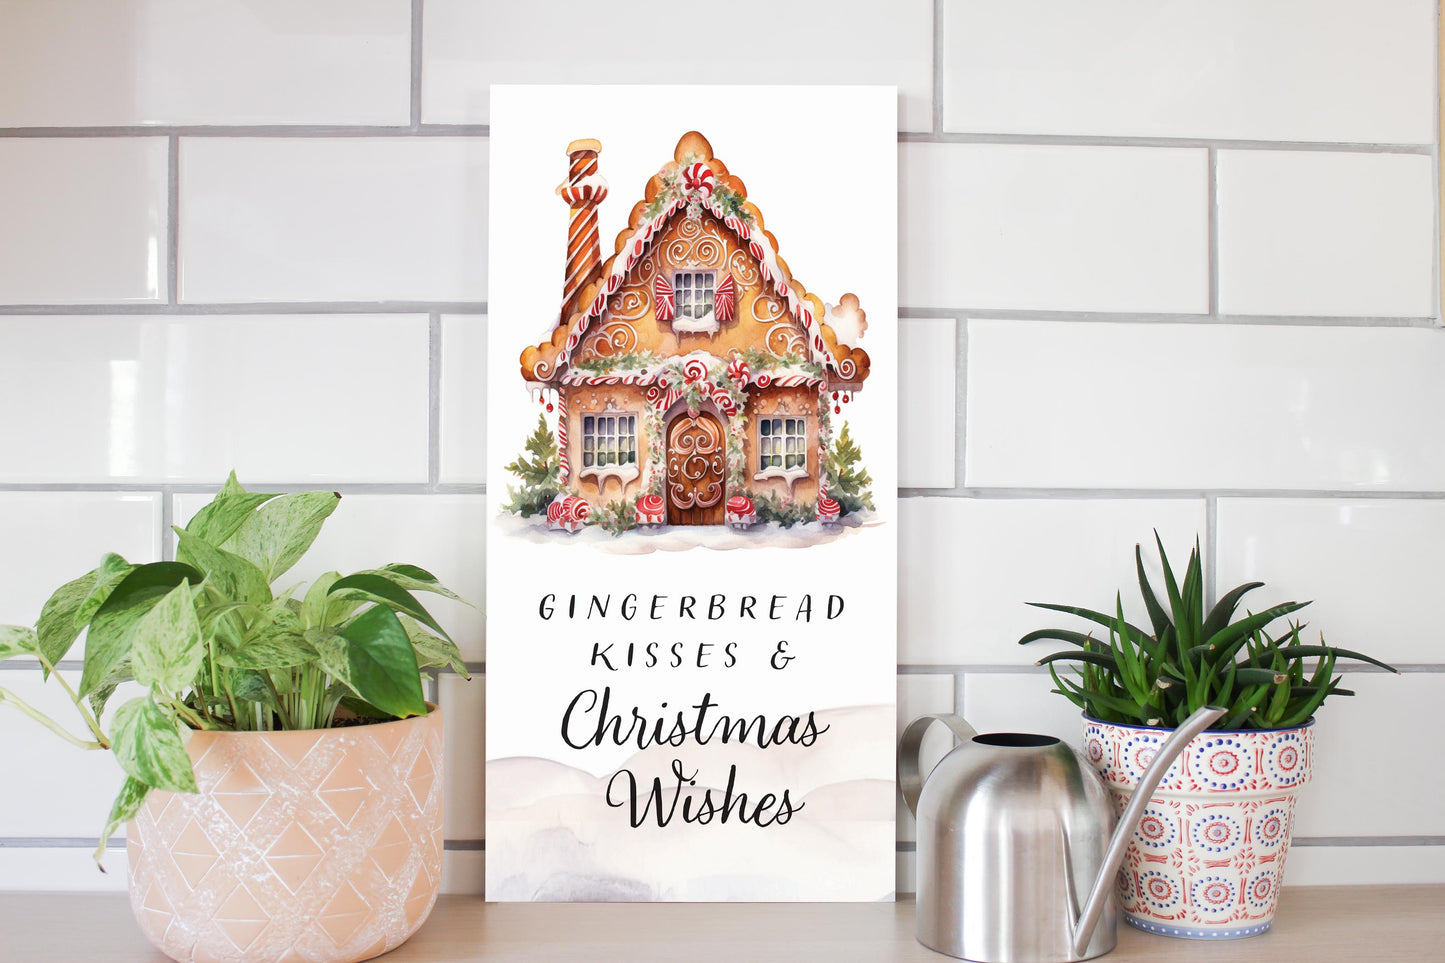 Gingerbread Kisses & Christmas Wishes House